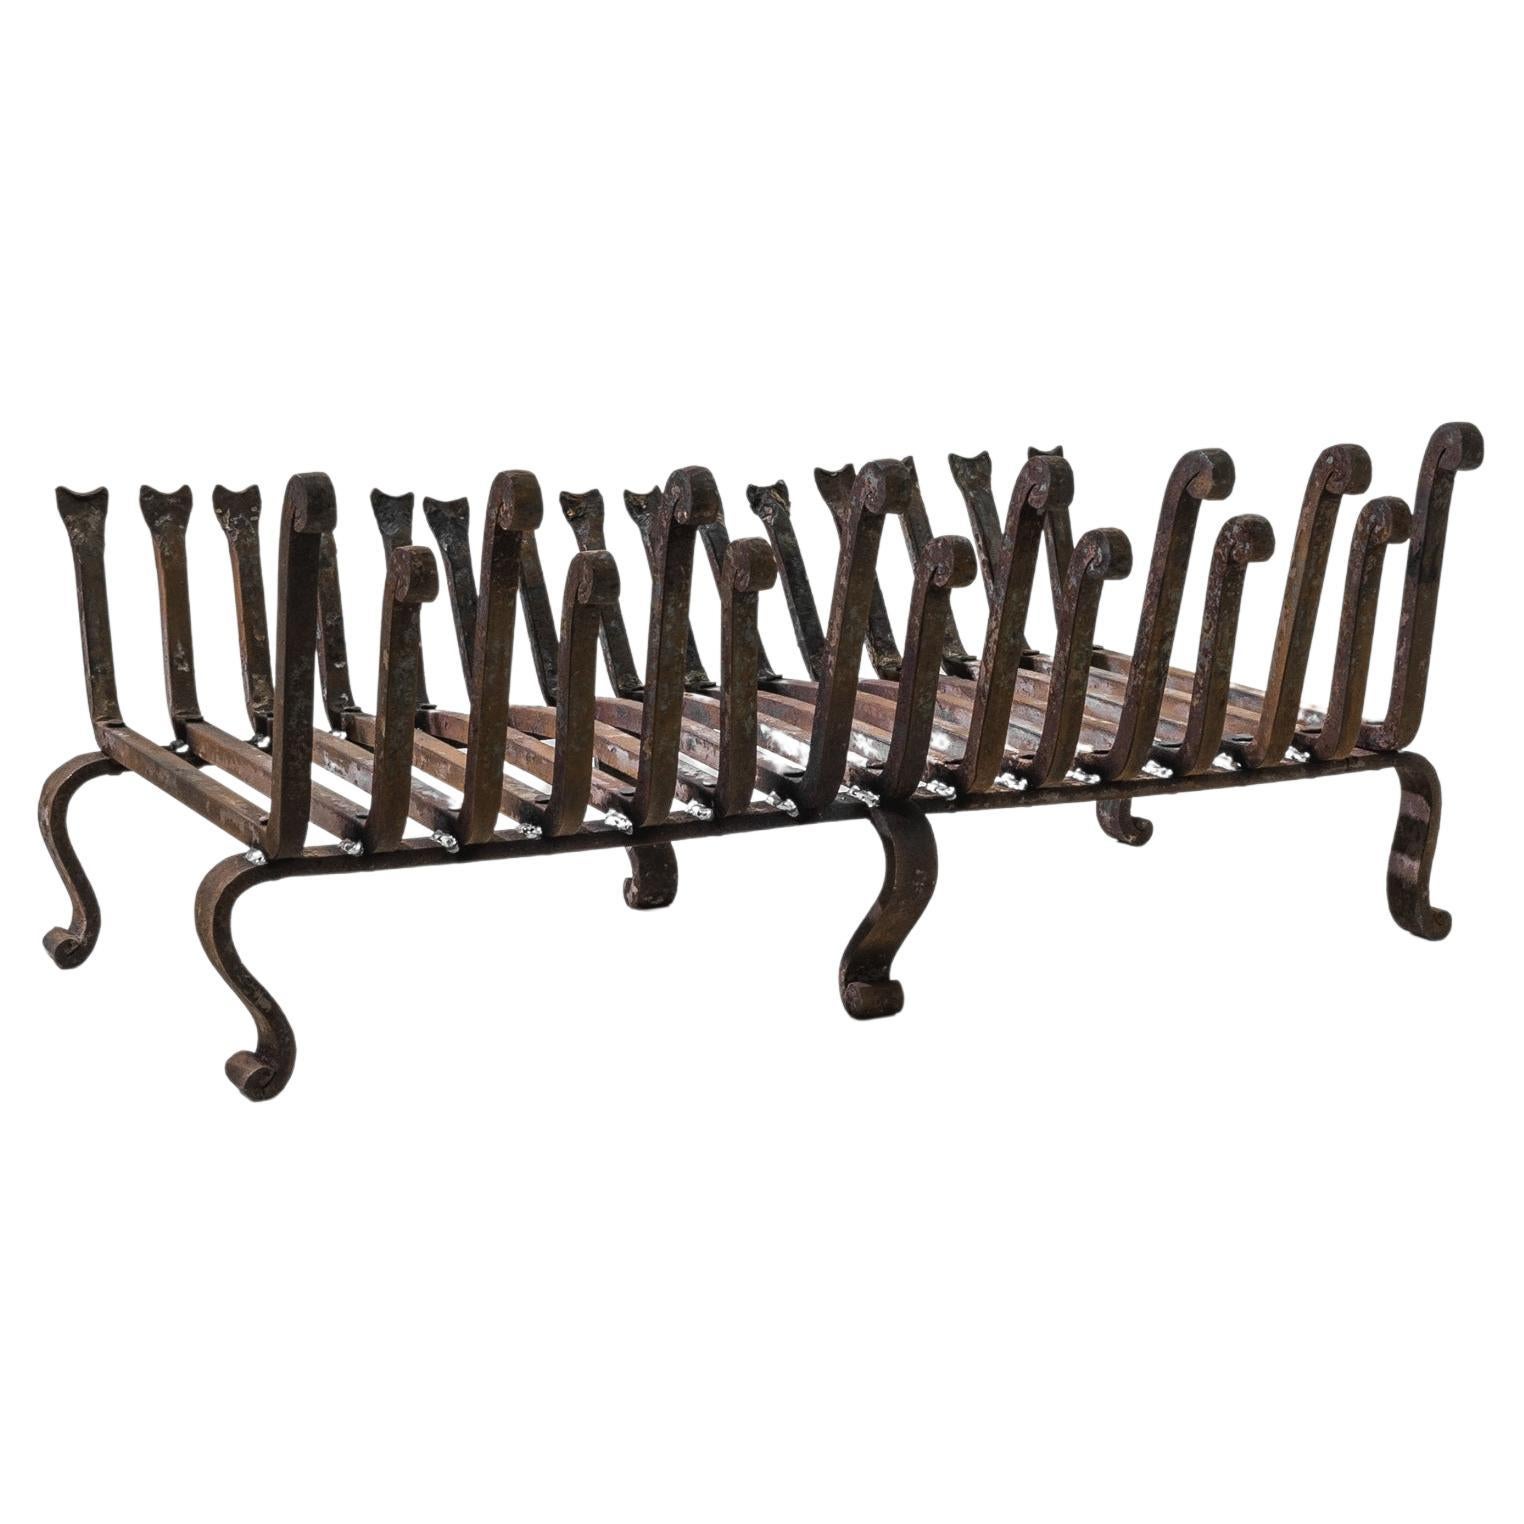 20th Century French Wrought Iron Grate